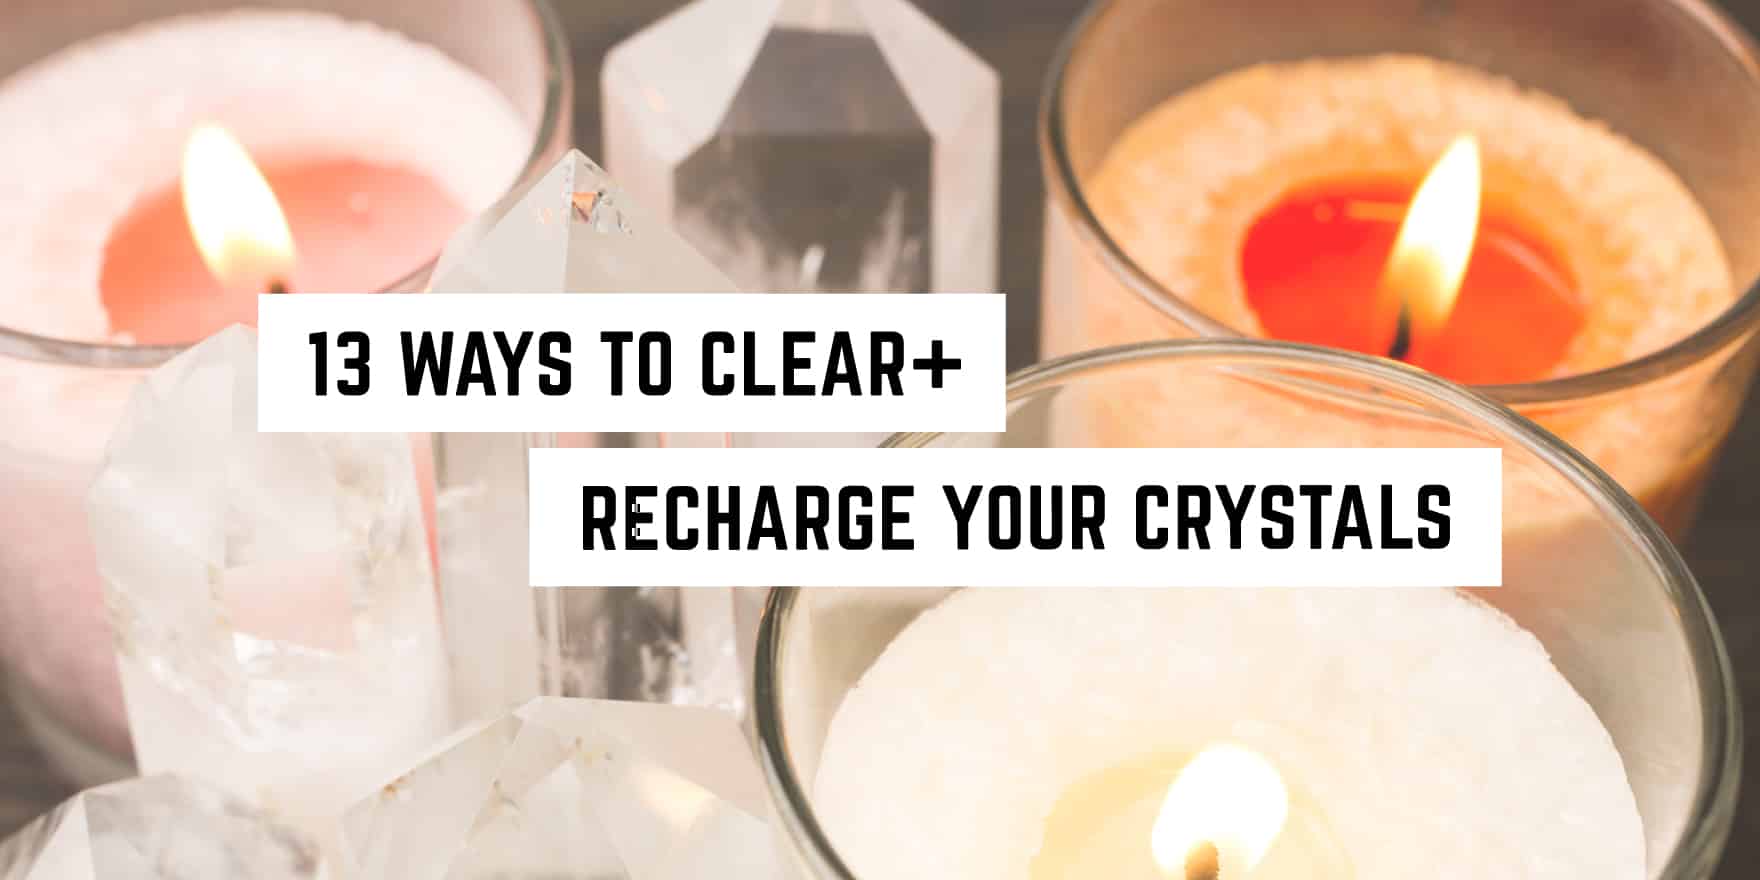 A serene setting with flickering candles and clear quartz crystals in a metaphysical shop, accompanied by the text "13 ways to clear + recharge your crystals.